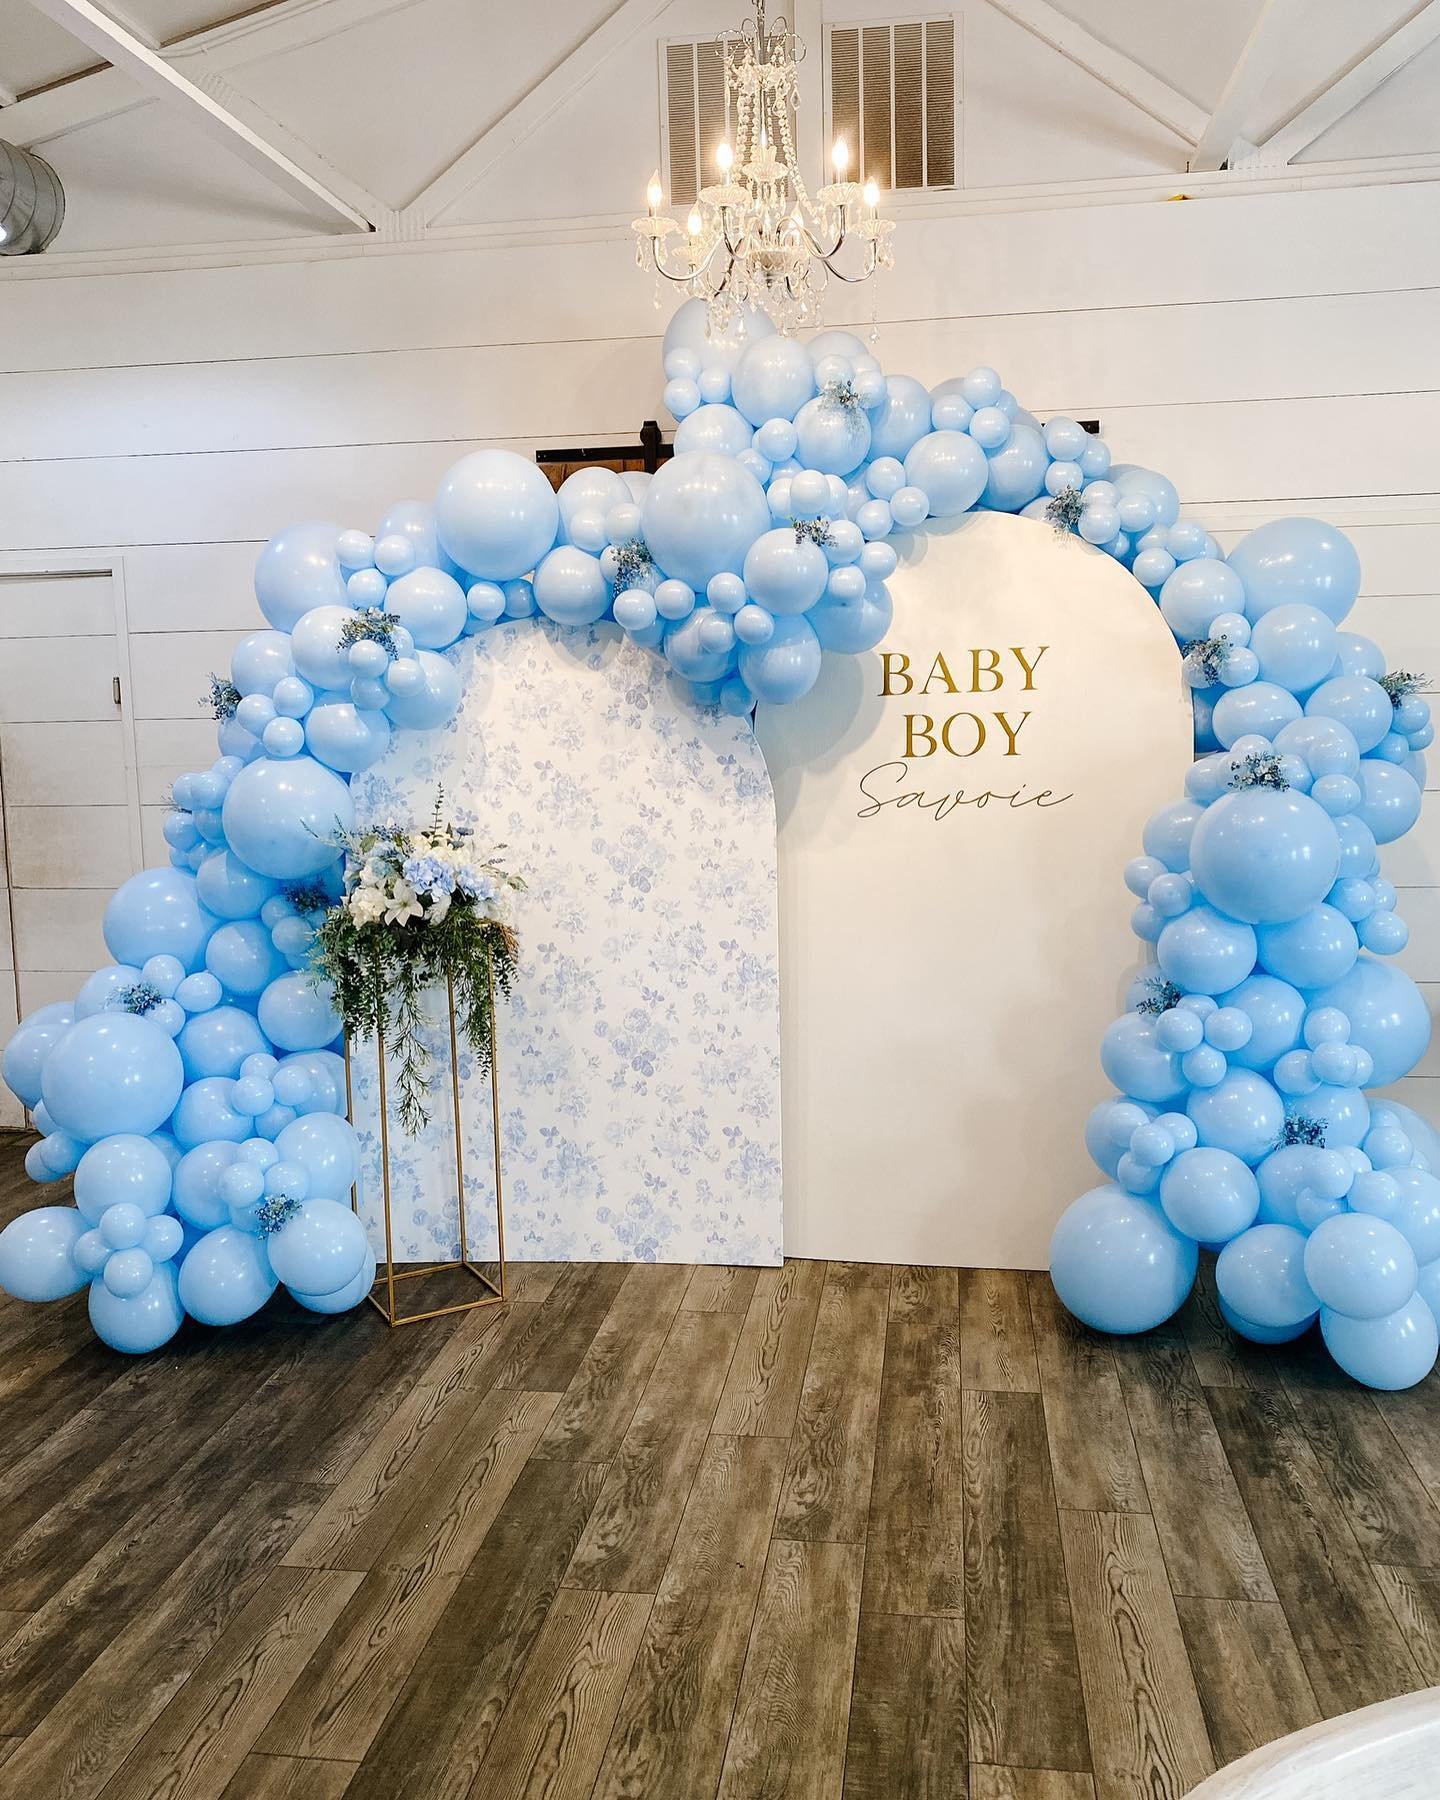 🩵BABY BOY SAVOIE🩵
One of the main reasons we started this small business was because of our mutual love for celebrating. We absolutely love helping our clients celebrate their life&rsquo;s most precious events, but having the opportunity to celebra